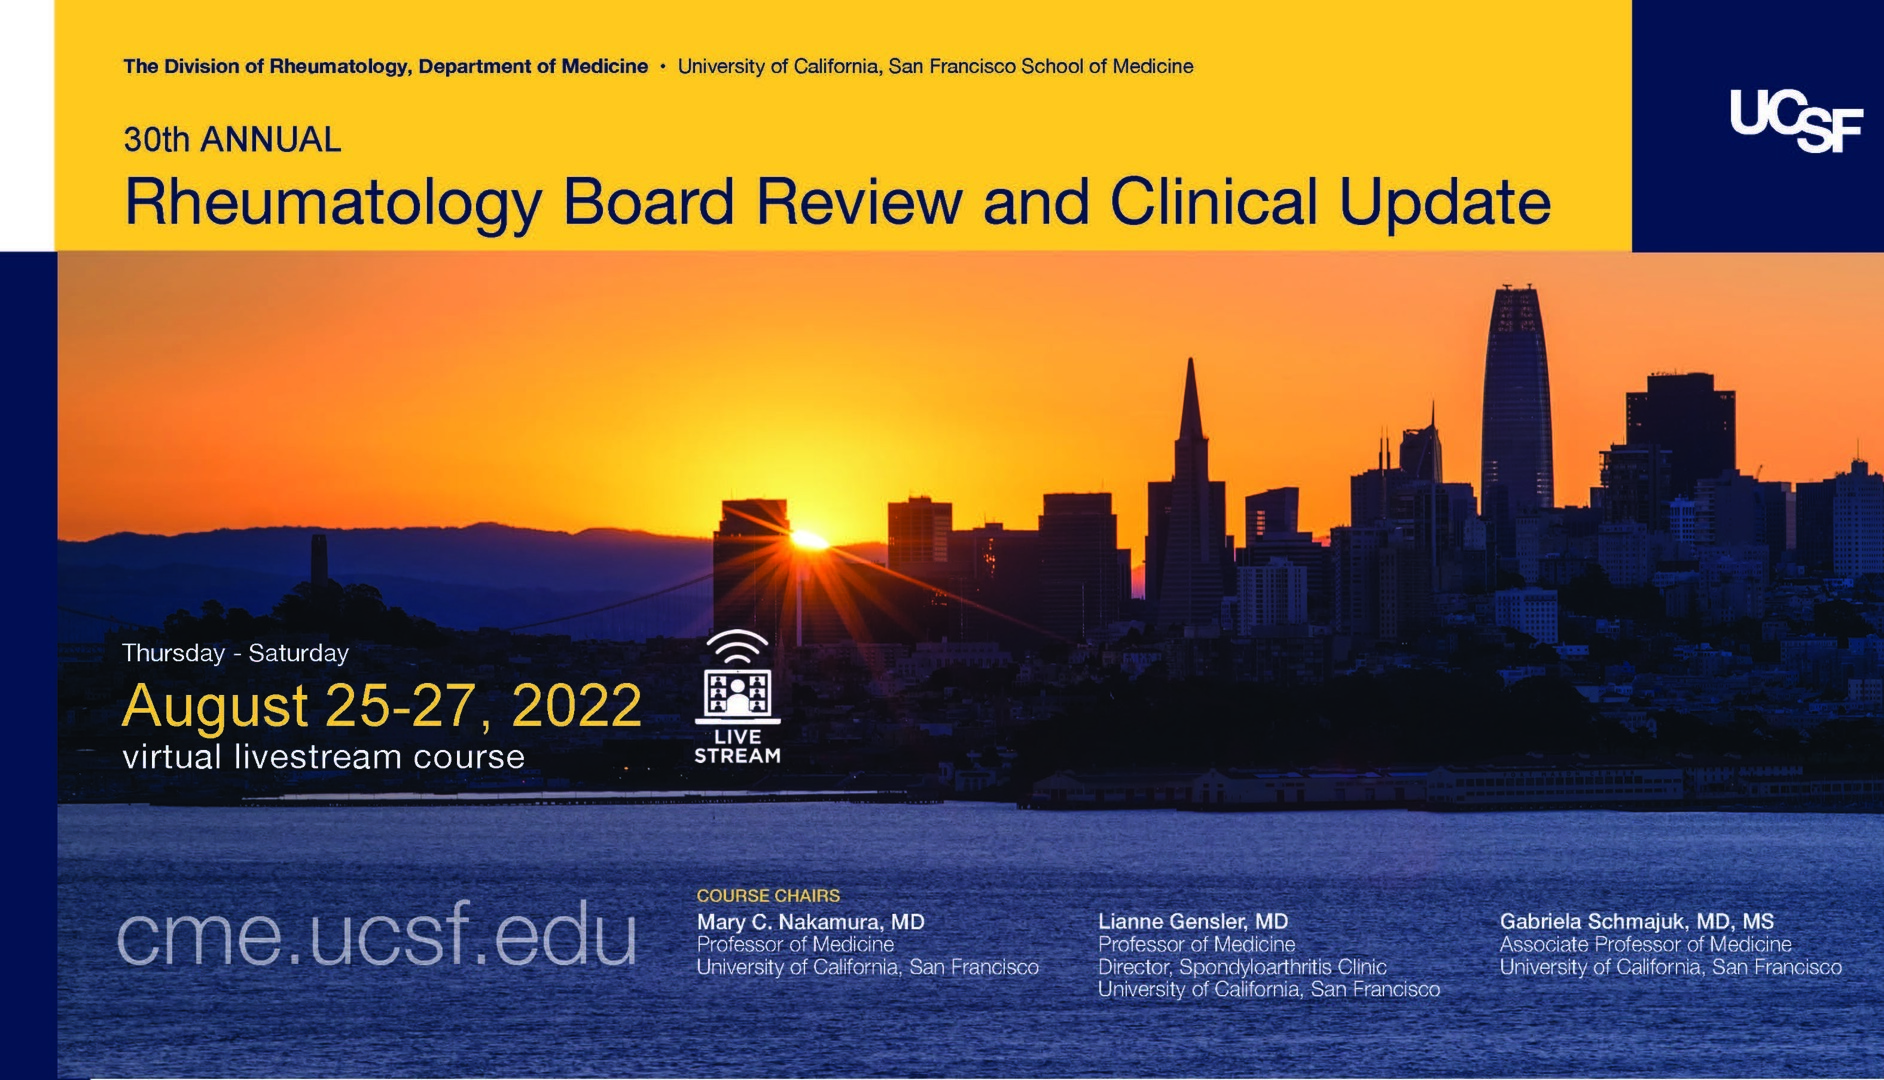 UCSF Rheumatology Board Review and Clinical Update